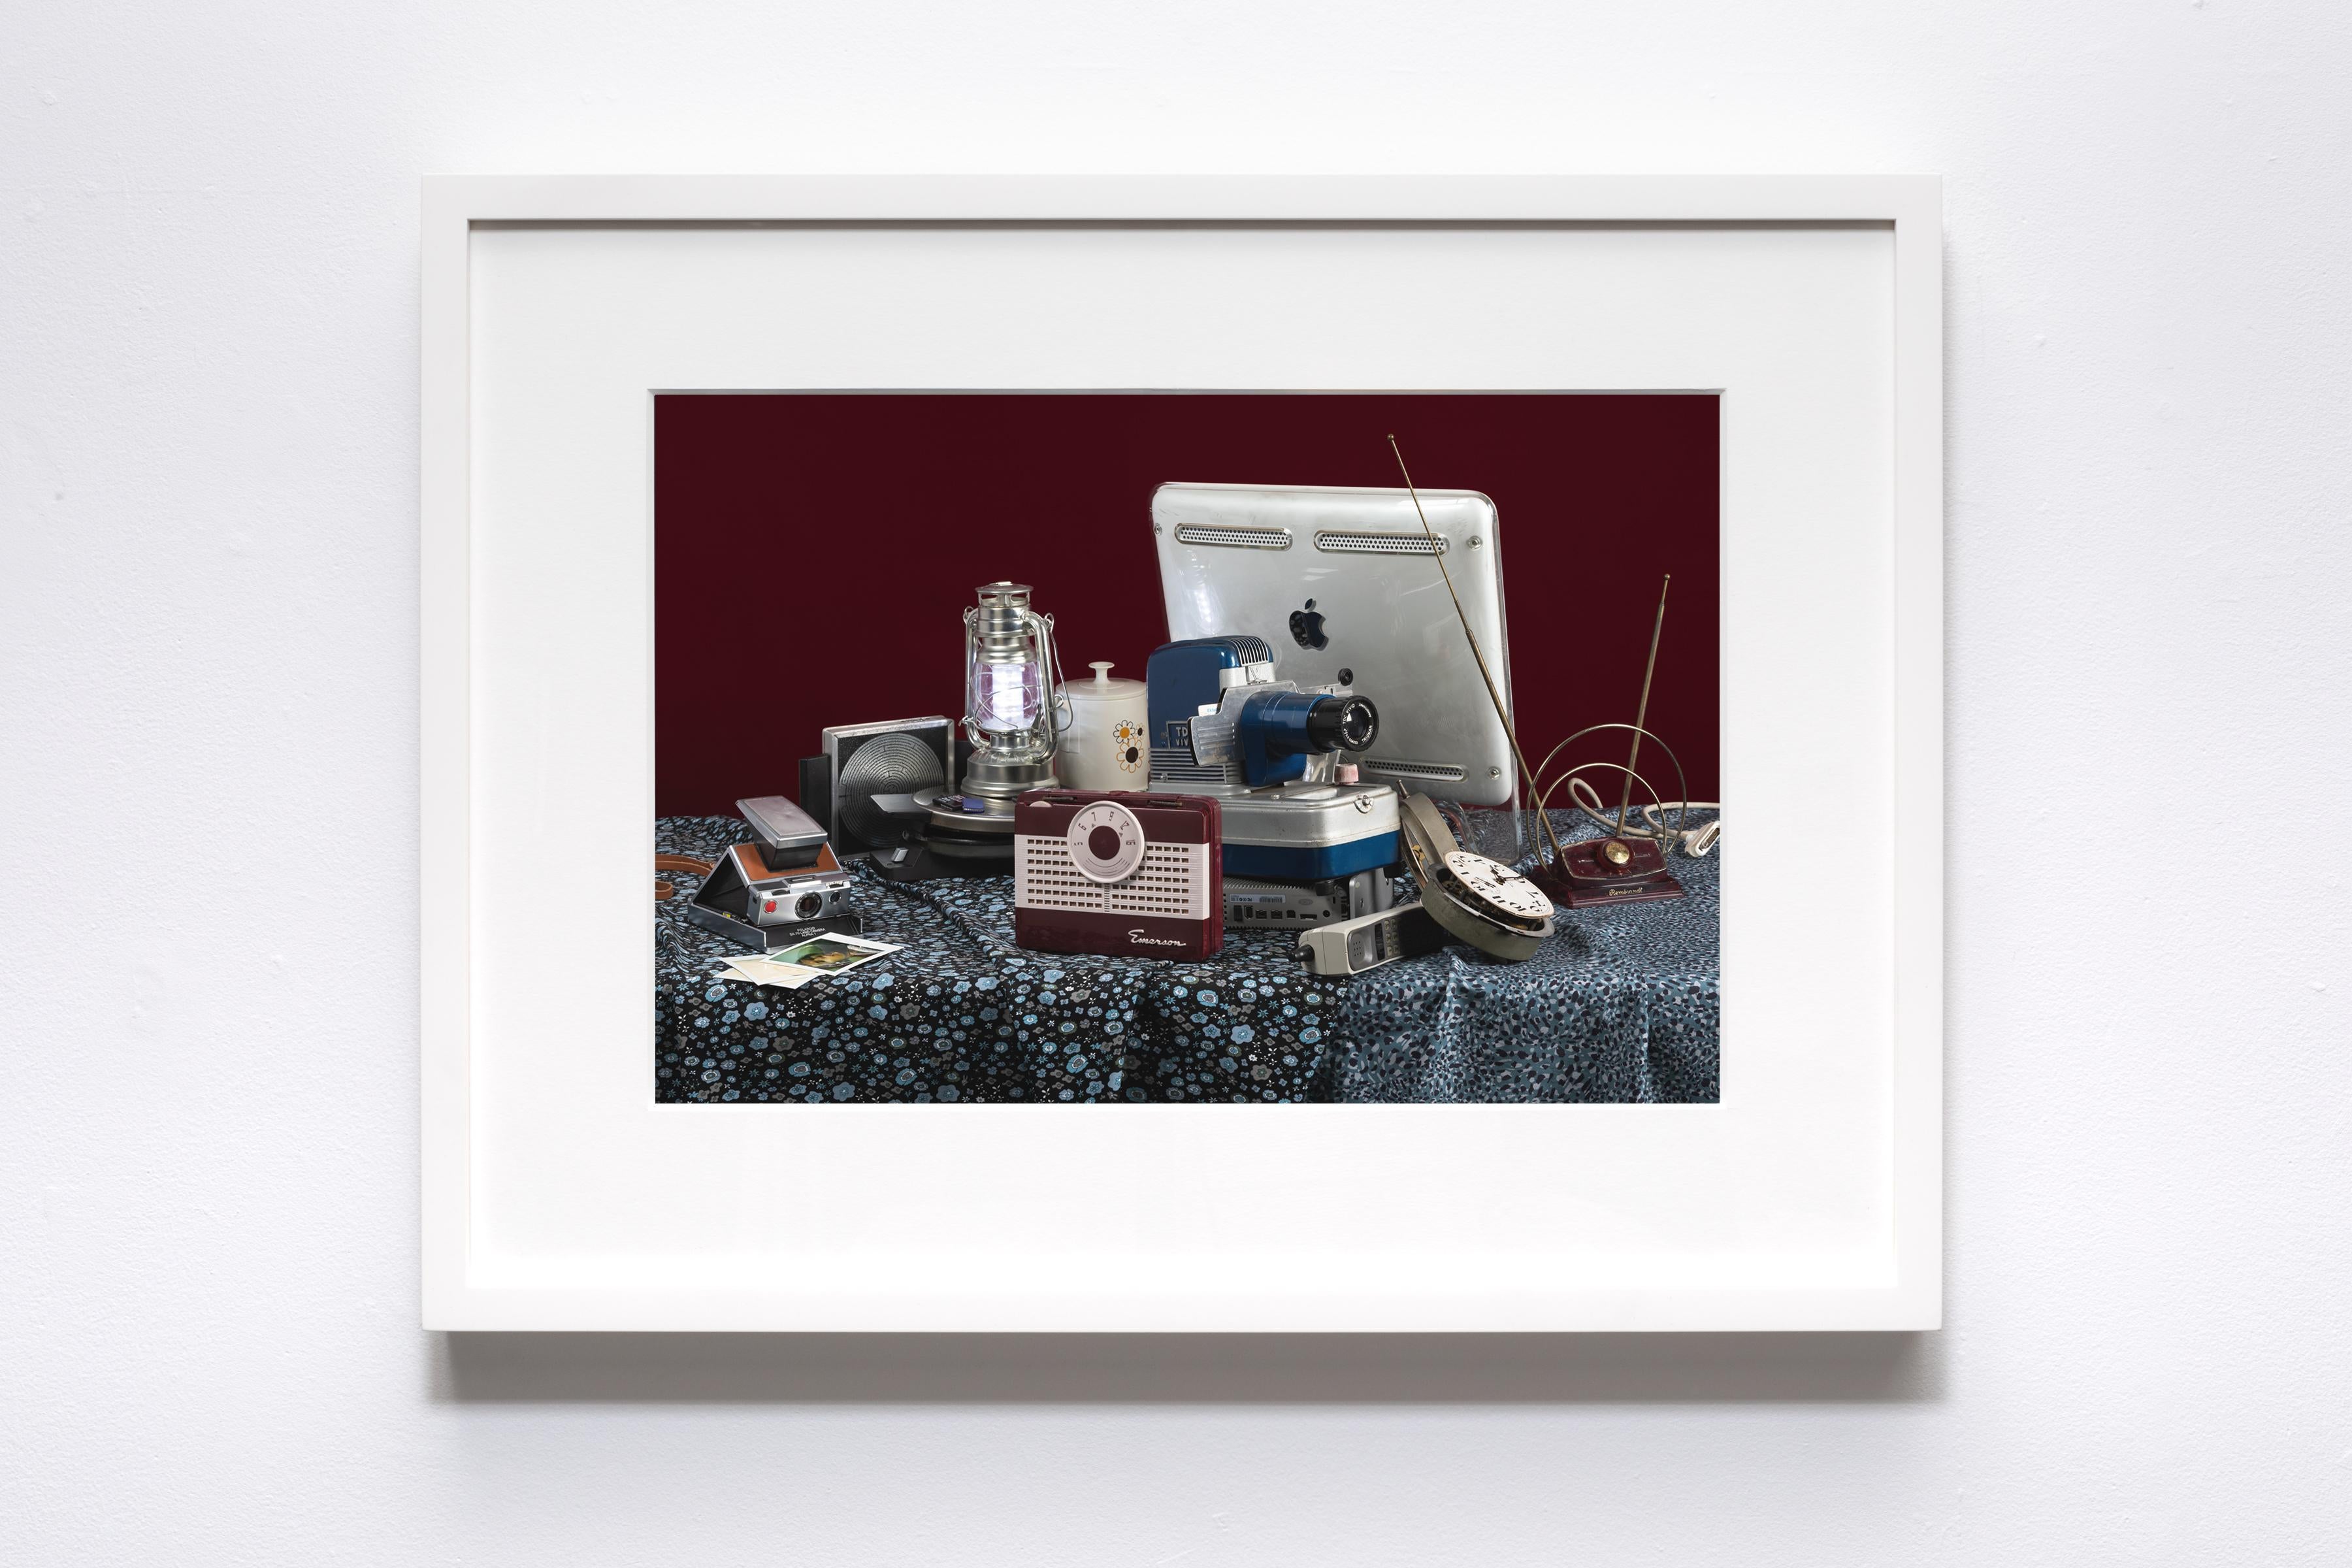 “Tech Vanitas: Polaroid SX70” Contemporary Still-life Photograph of Vintage Tech - Black Still-Life Photograph by Jeanette May